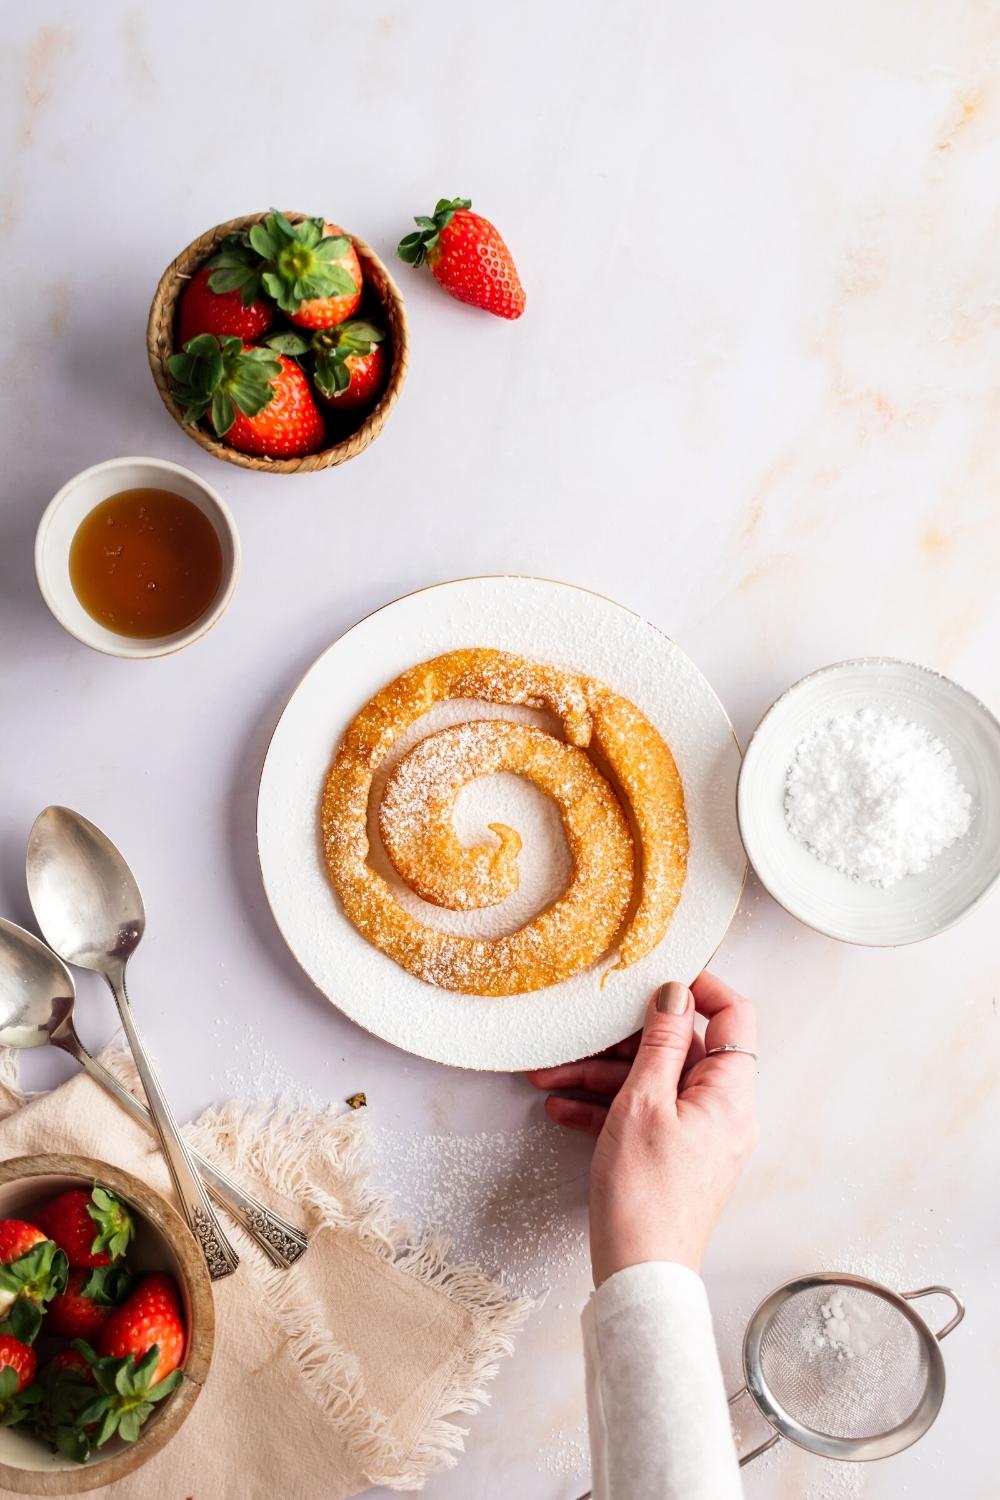 A hand holding a plate on a white counter that has a circular funnel cake on it. Surrounding the plate is a bowl of powdered sugar, a bowl of strawberries, and a bowl of syrup.